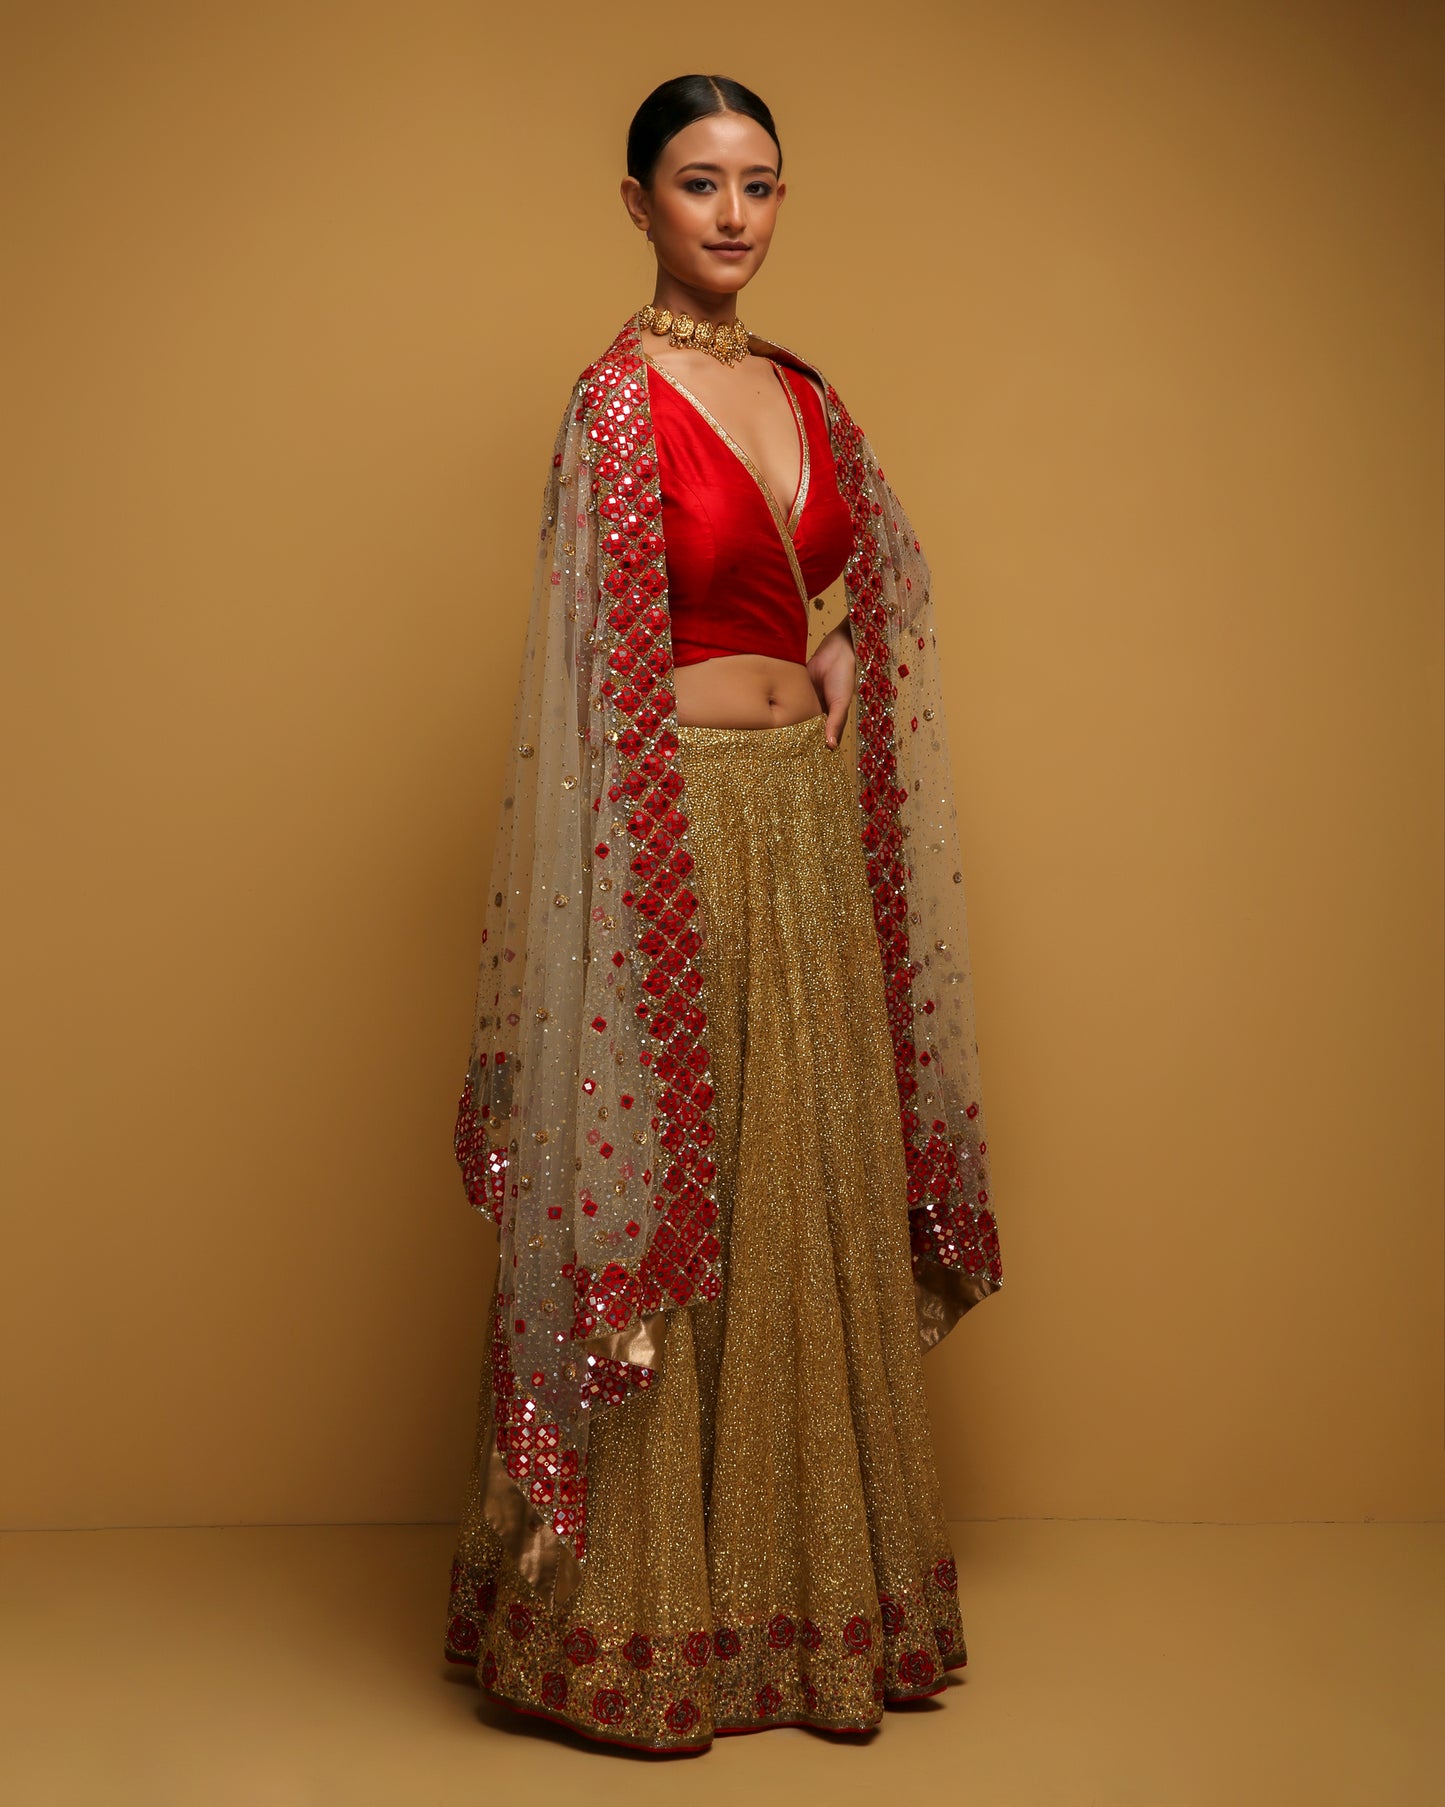 Golden Sequins Lehenga Set With Red Silk Wrap-around Blouse And Dupatta